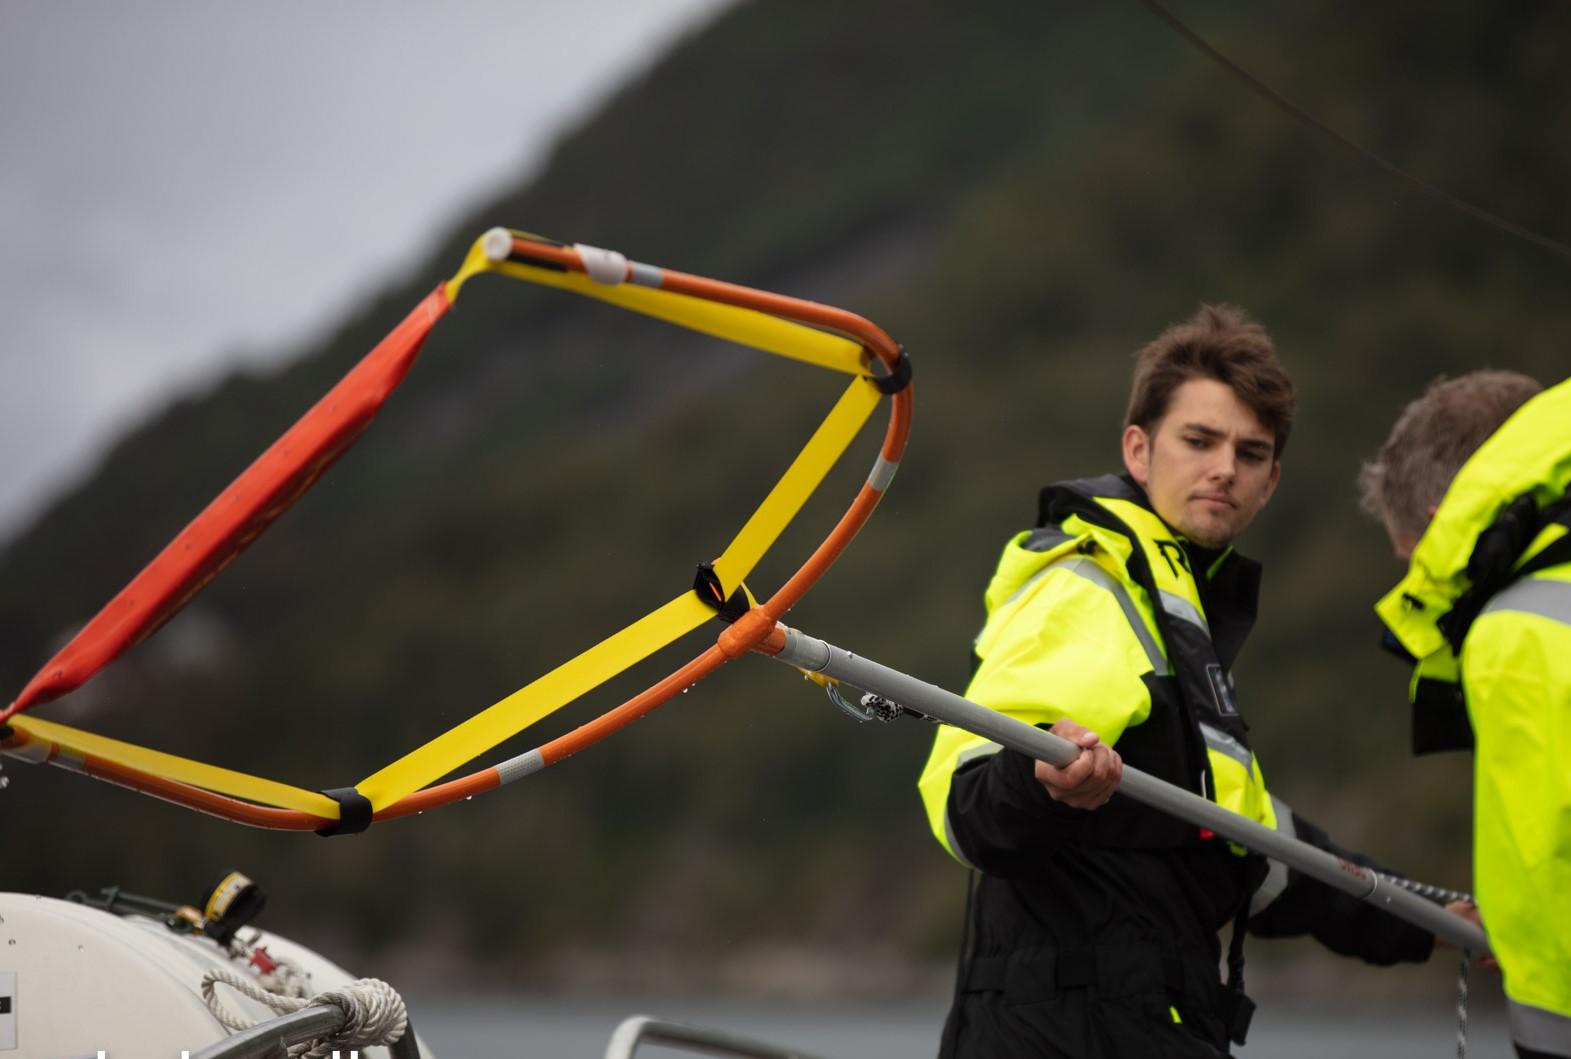 A man utilising the SB Rescue Sling's extension feature, with an adjustable length ranging from 2.1m to 5.2m